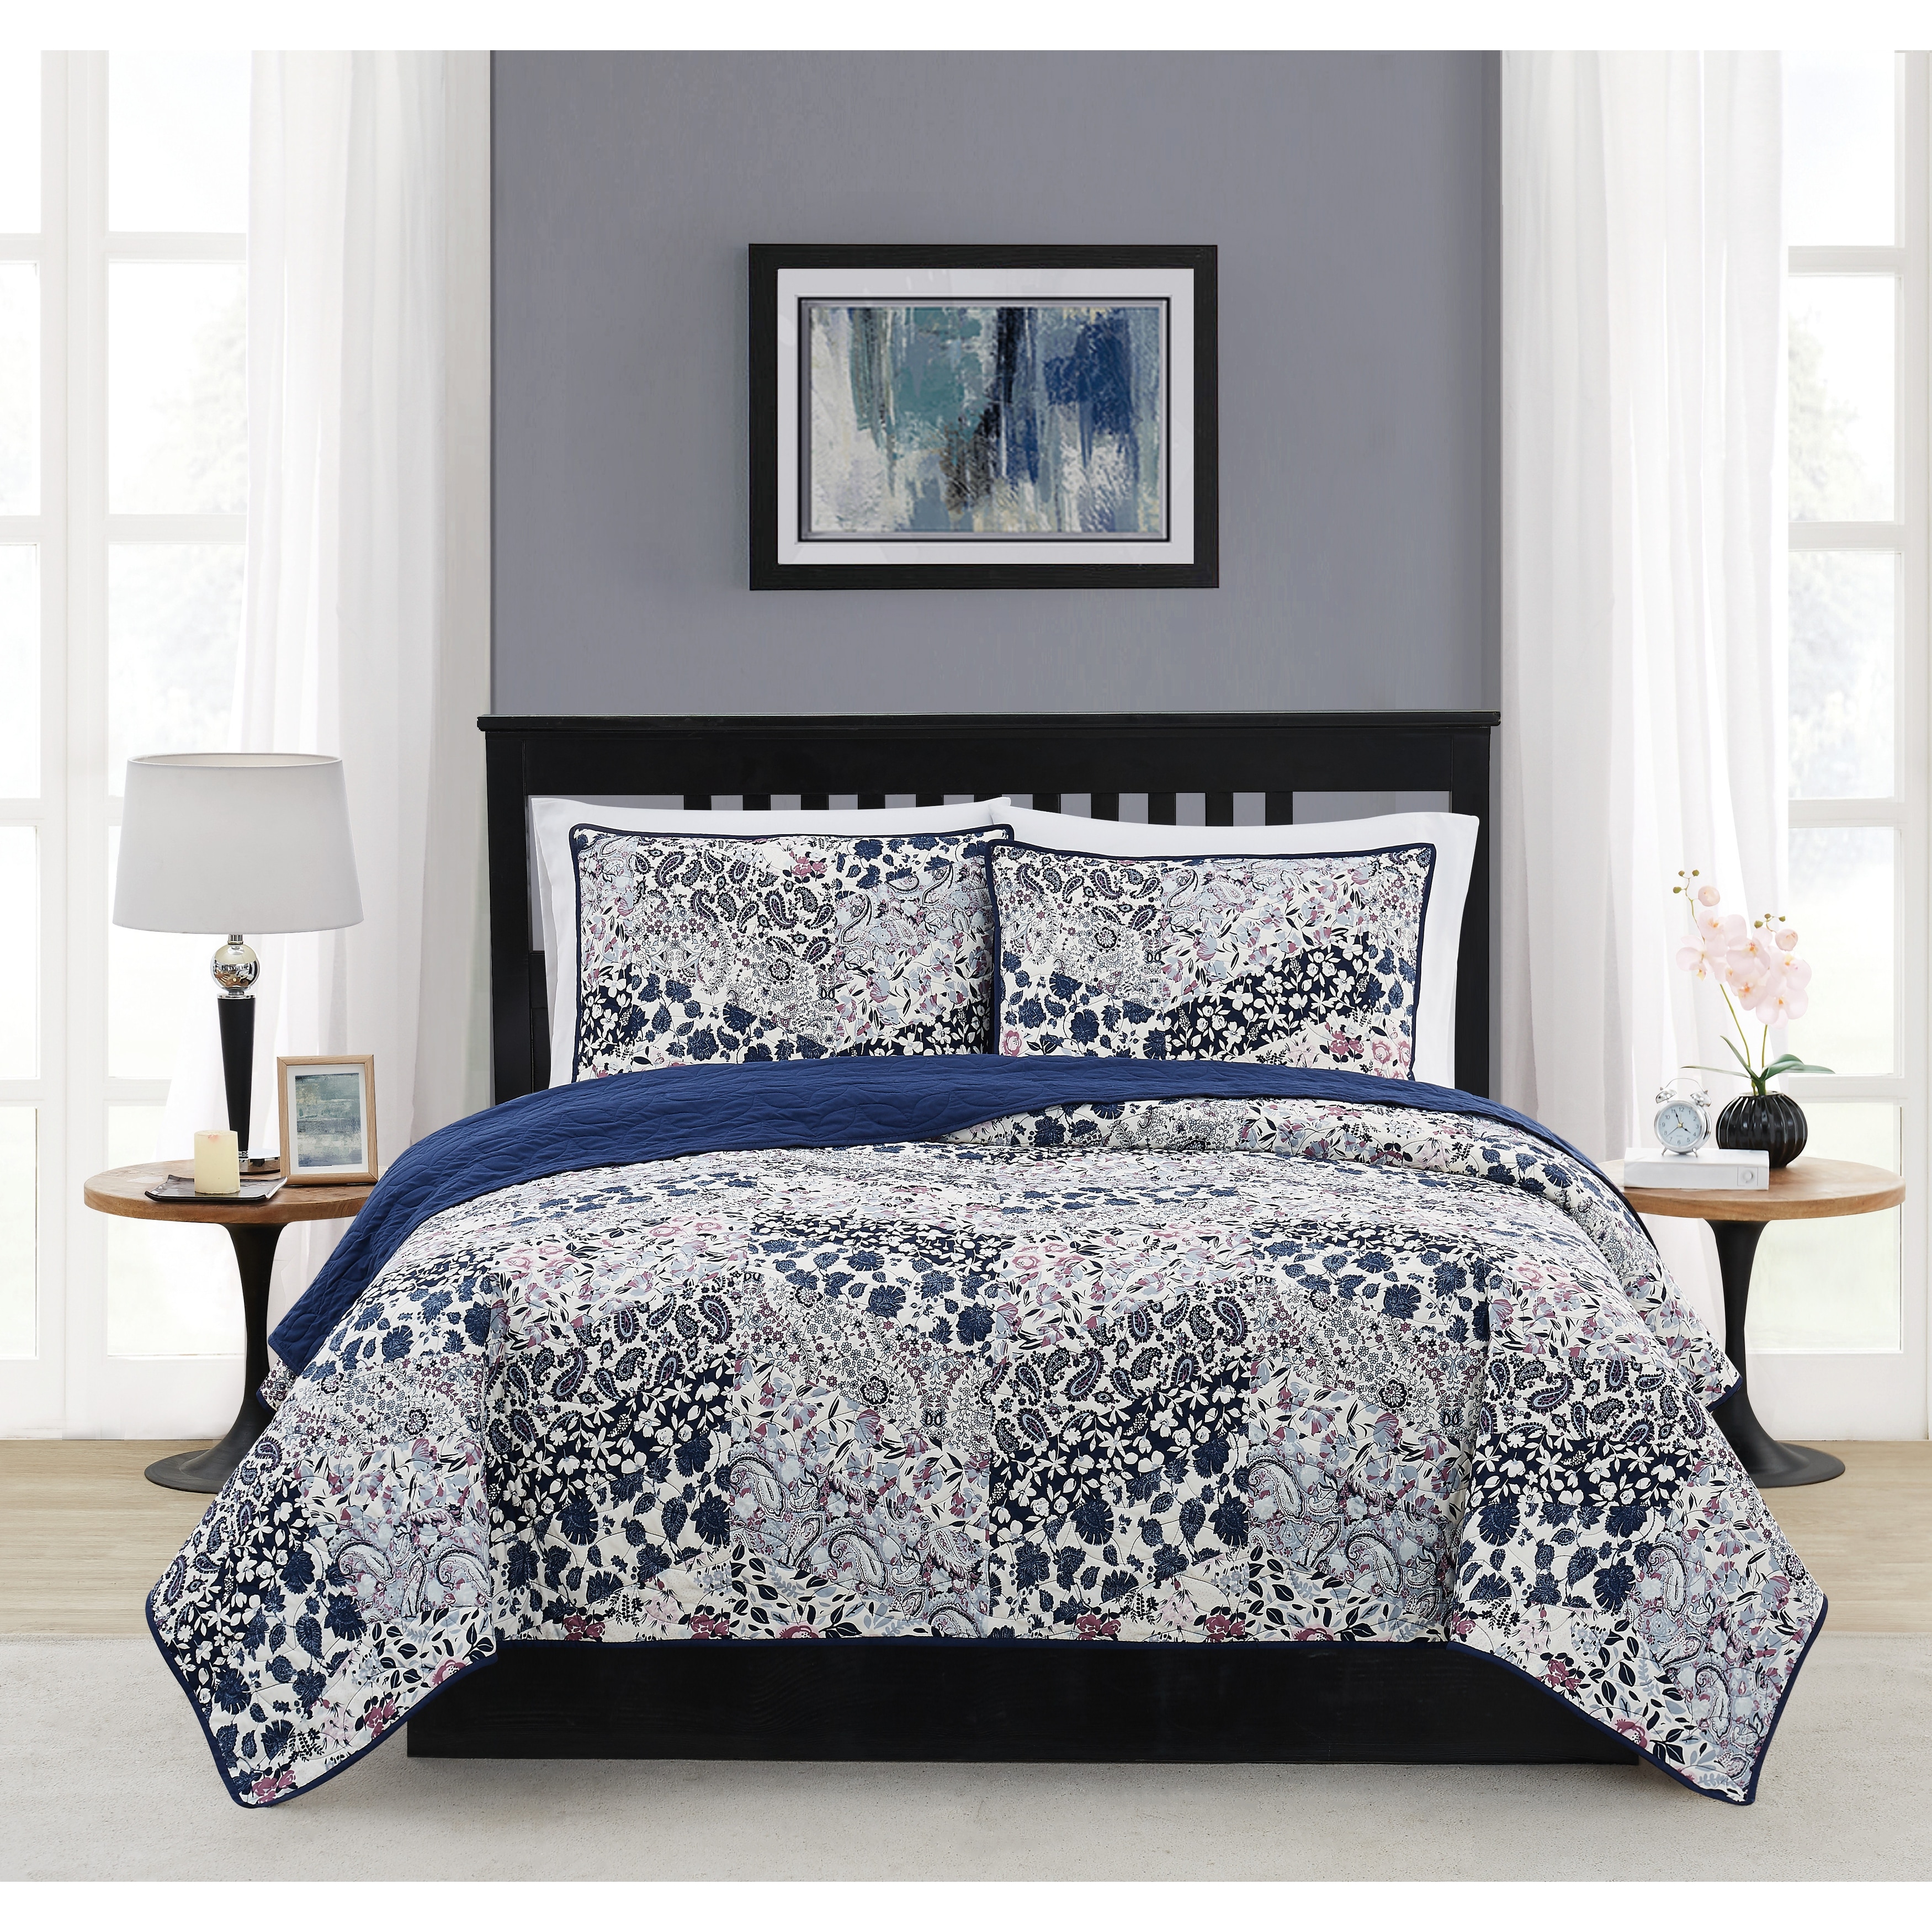 https://ak1.ostkcdn.com/images/products/is/images/direct/fead747611c81fbd48689e701601b9e567bc3344/Cannon-Chelsea-Quilt-Set.jpg